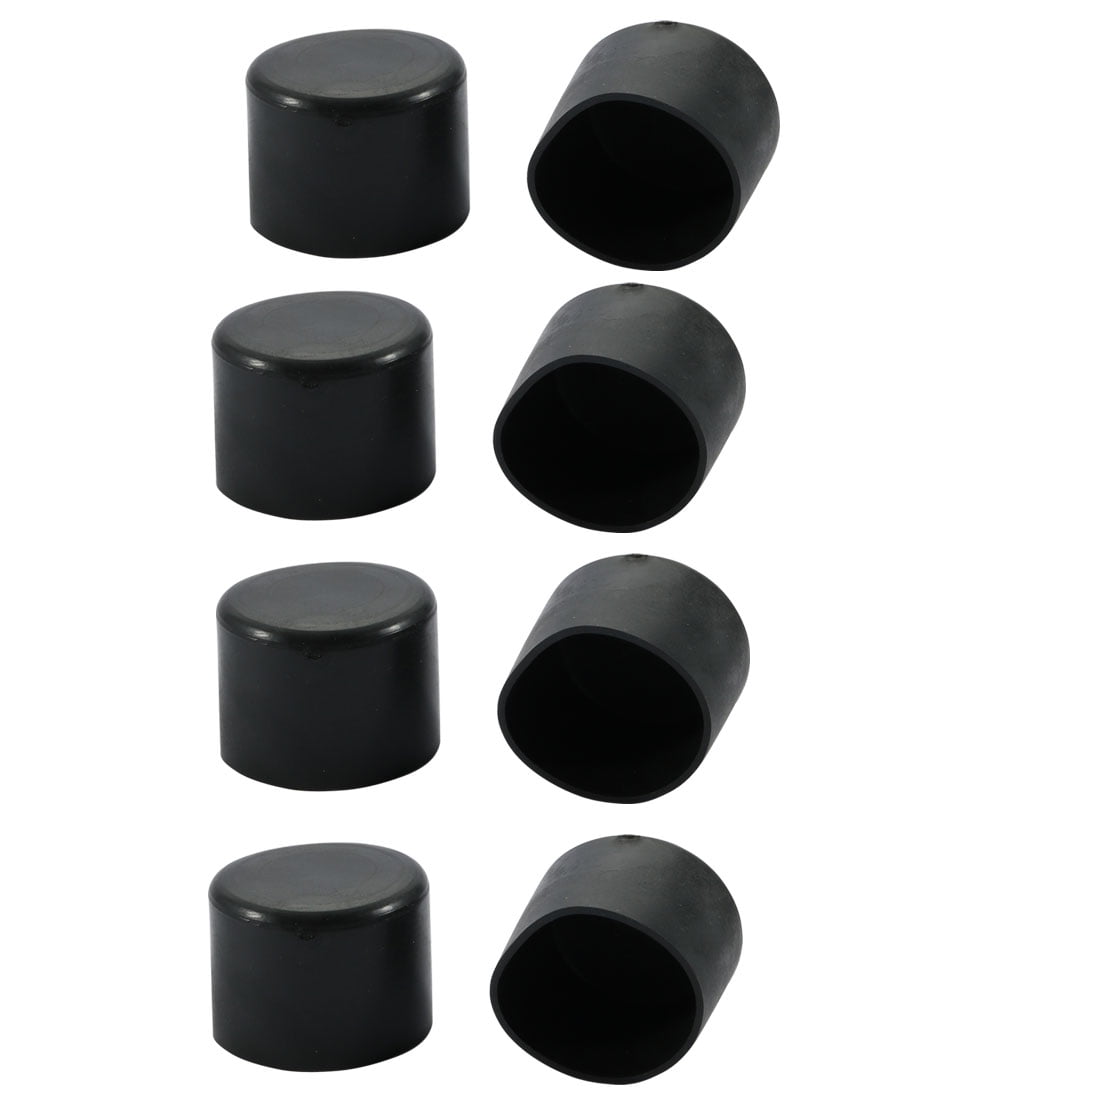 uxcell 30mm Dia Black PVC Rubber Round Cabinet Leg Insert Cover Protector